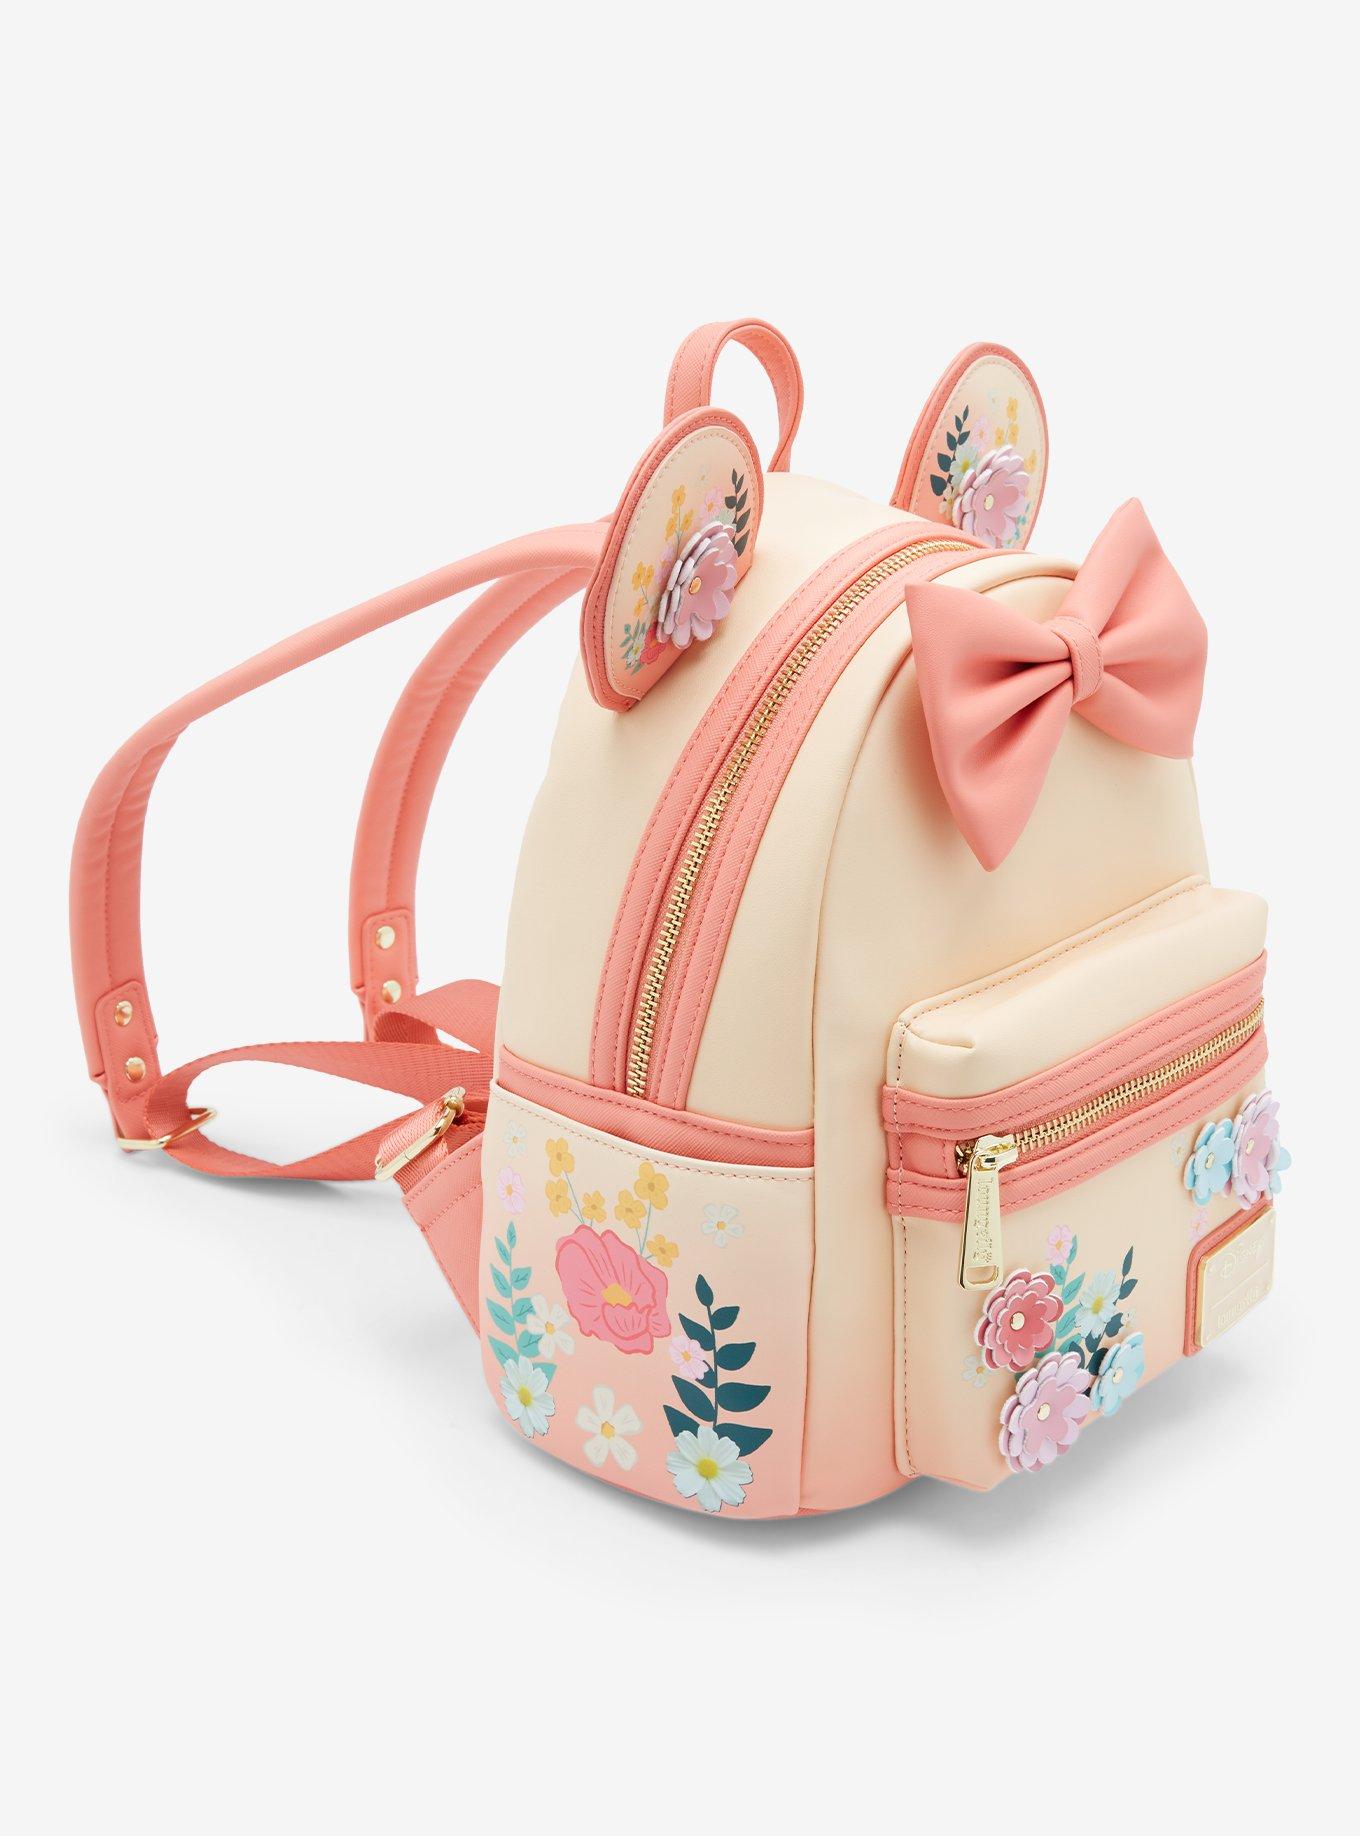 Loungefly Disney Snowflake Minnie Mouse Ears Mini Backpack - BoxLunch  Exclusive